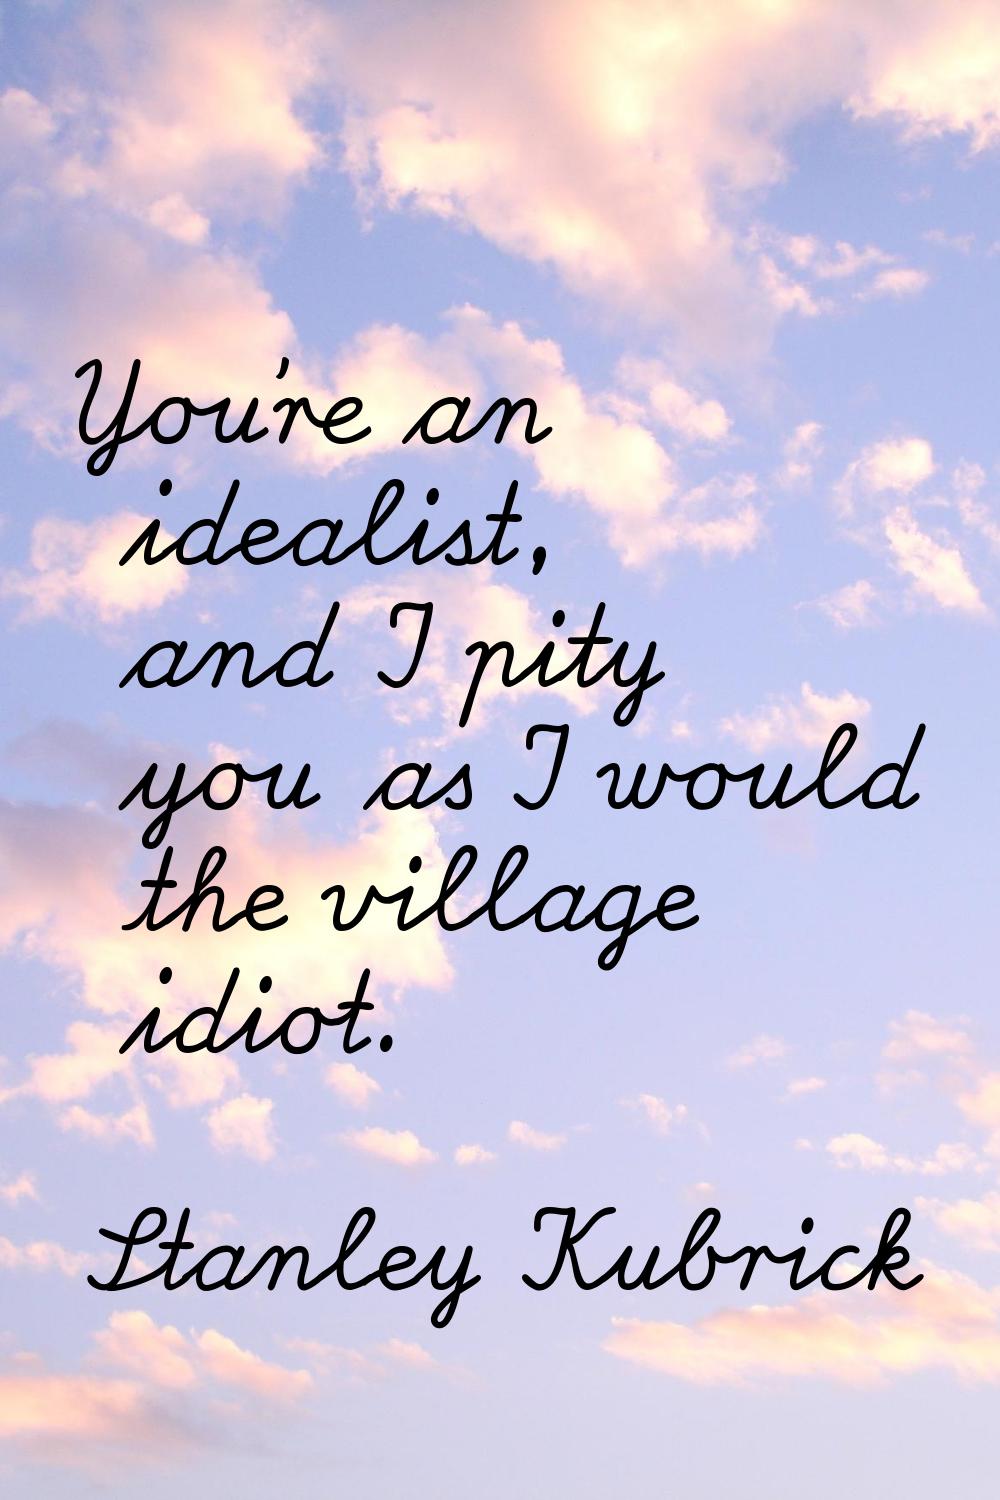 You're an idealist, and I pity you as I would the village idiot.